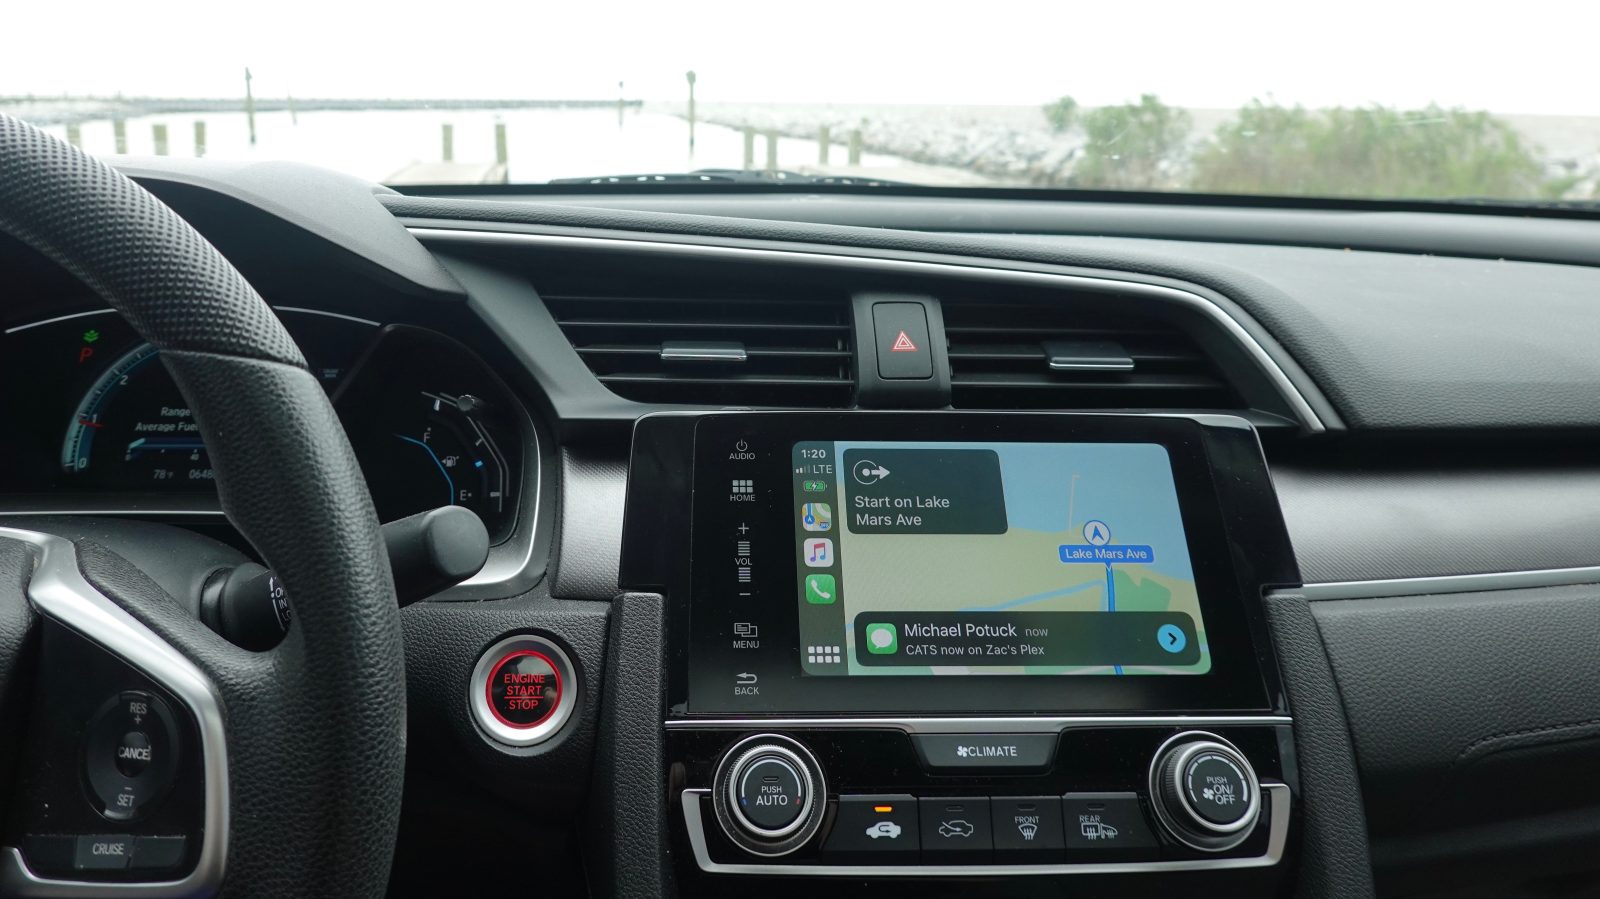 This adapter turns standard CarPlay into wireless, actually works